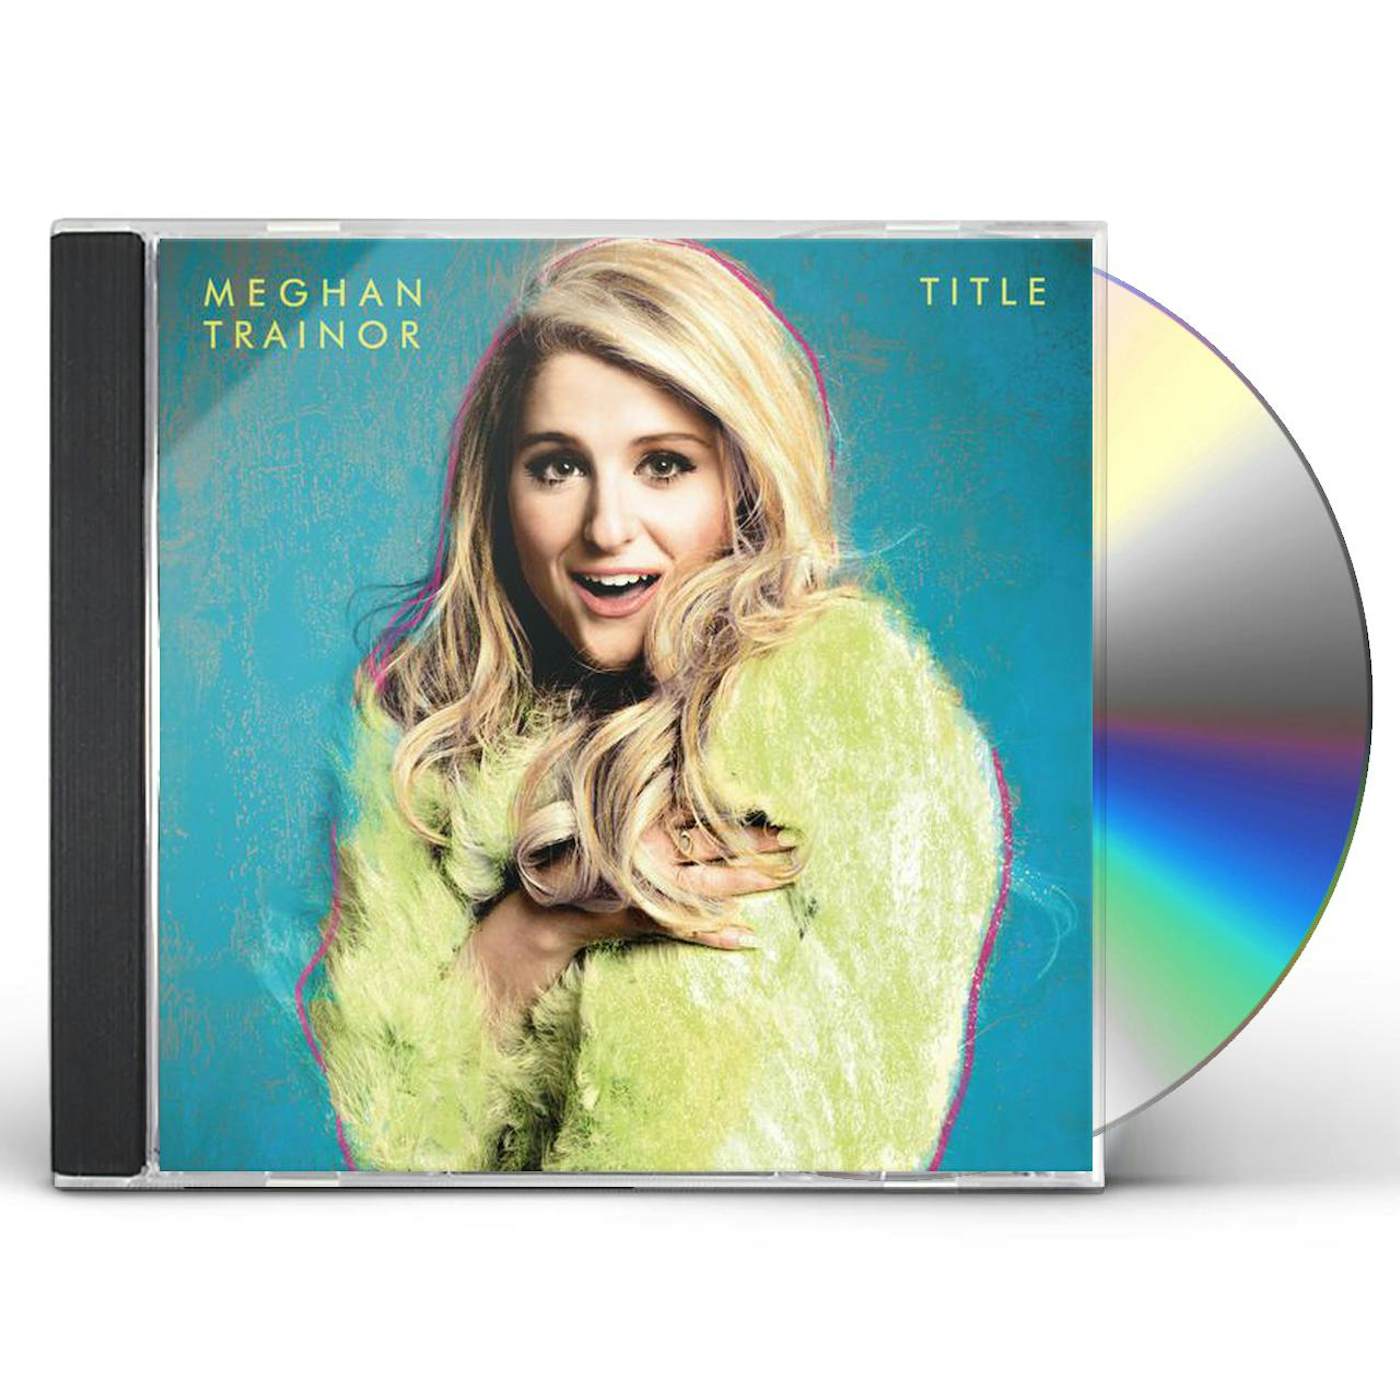 Meghan Trainor Song Gifts & Merchandise for Sale